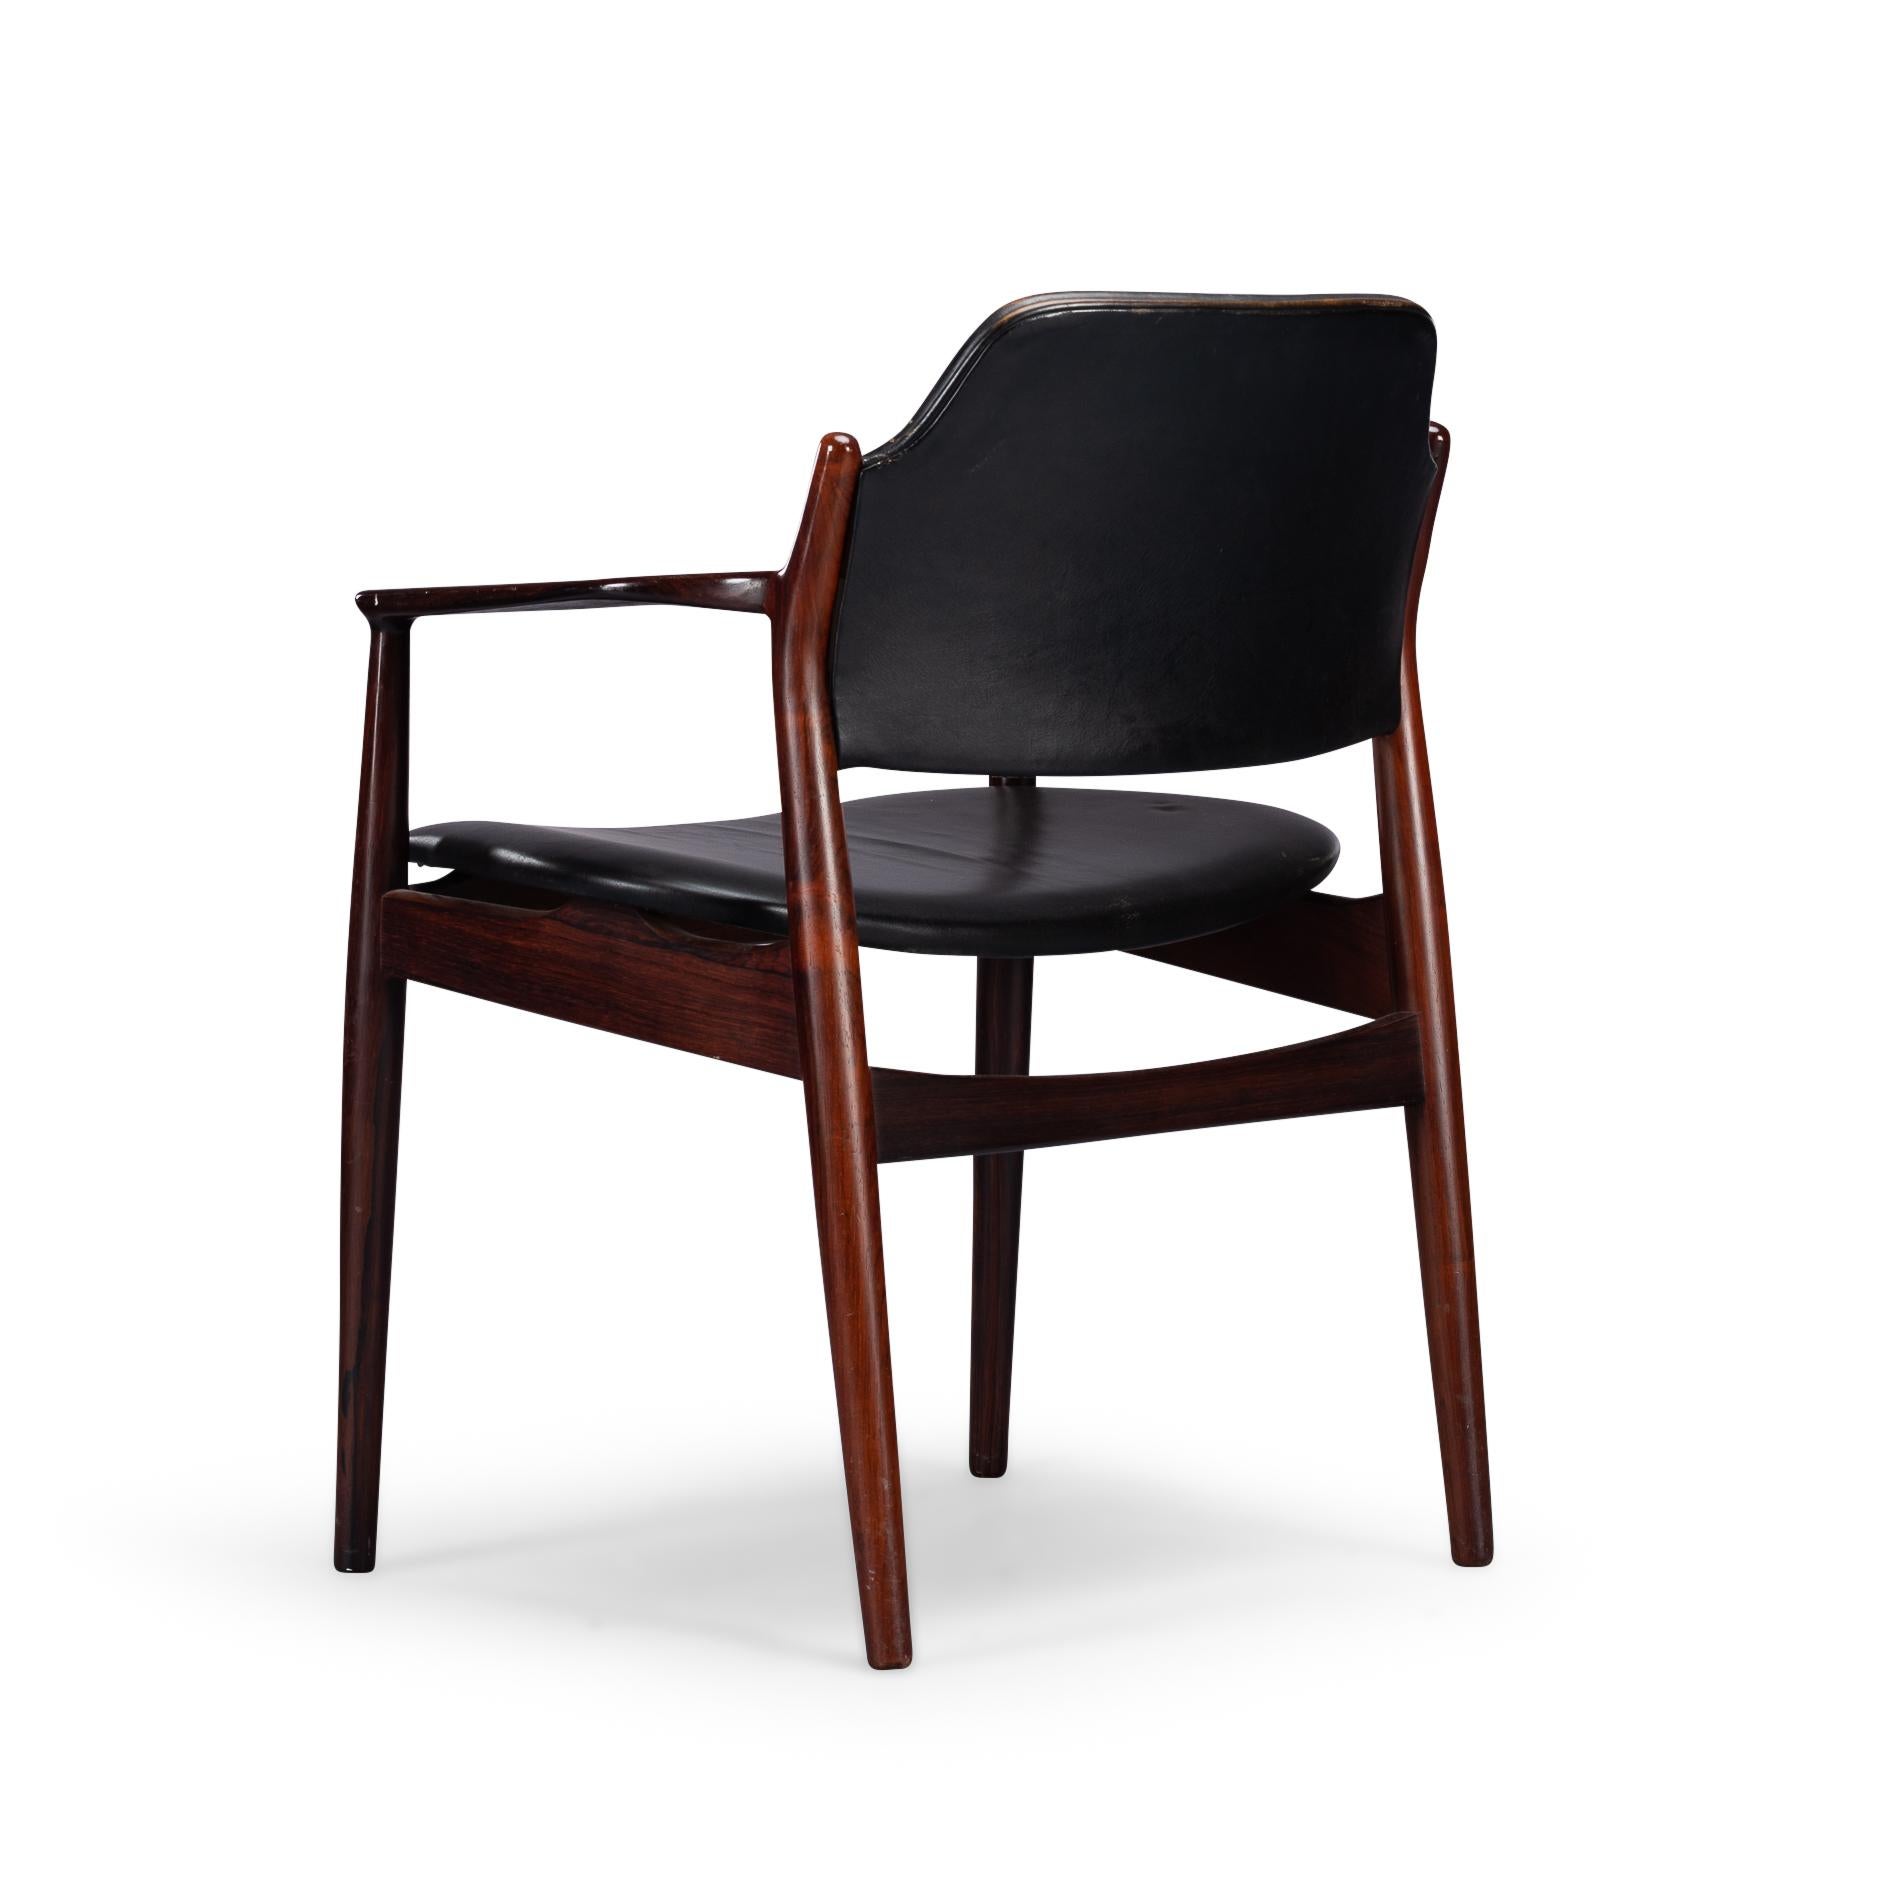 Danish Desk Chair No. 62a in Rosewood with Black Leather, 1960s